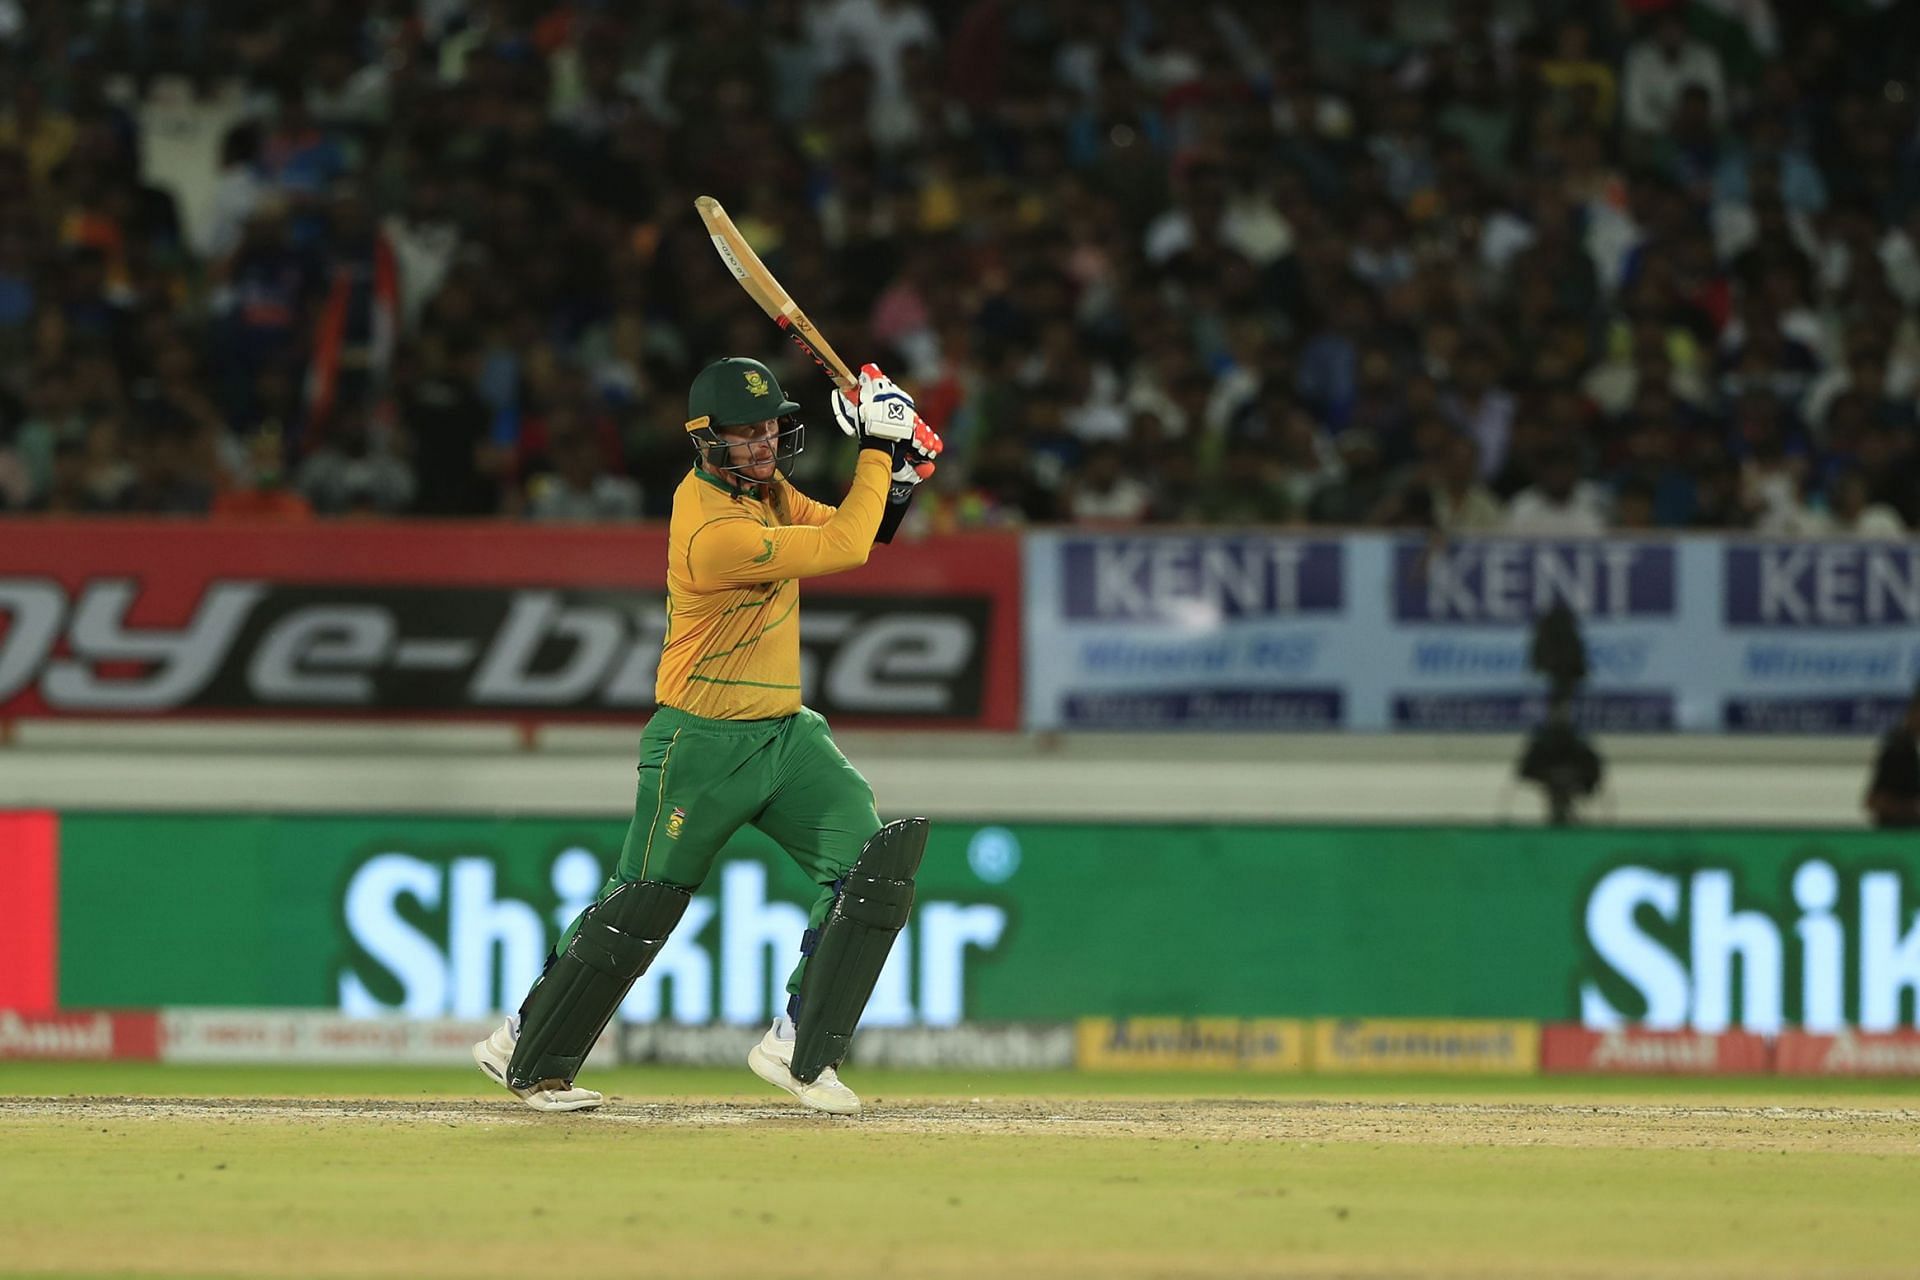 Heinrich Klaasen has been in impressive form lately. (Pic: Getty Images)